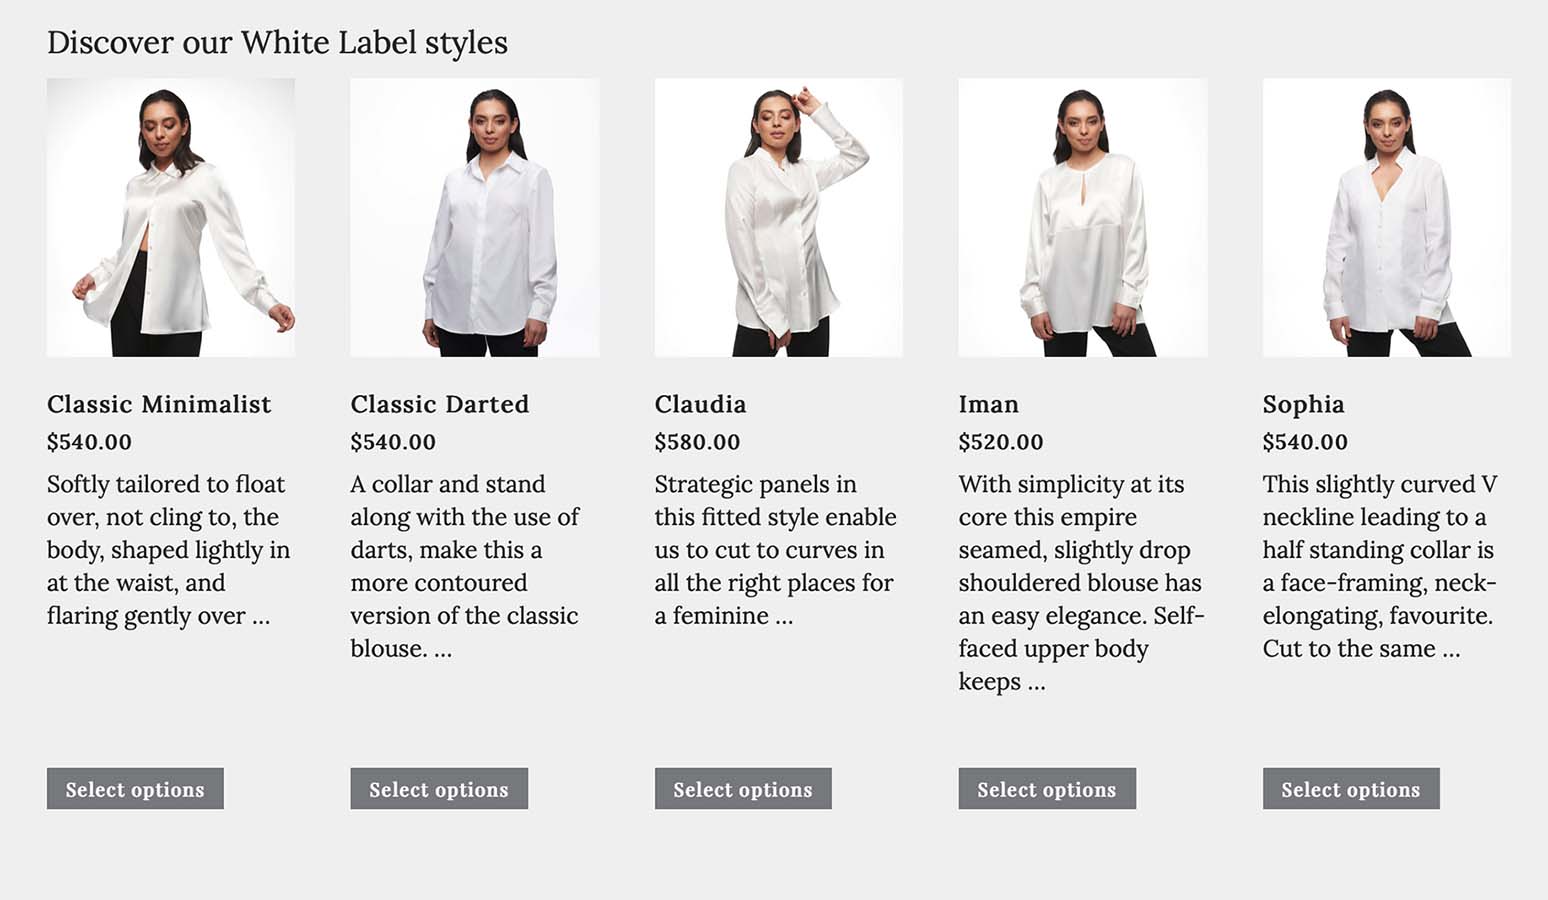 Screen grab of website with five images of the same woman wearing different white shirts on a white background. 